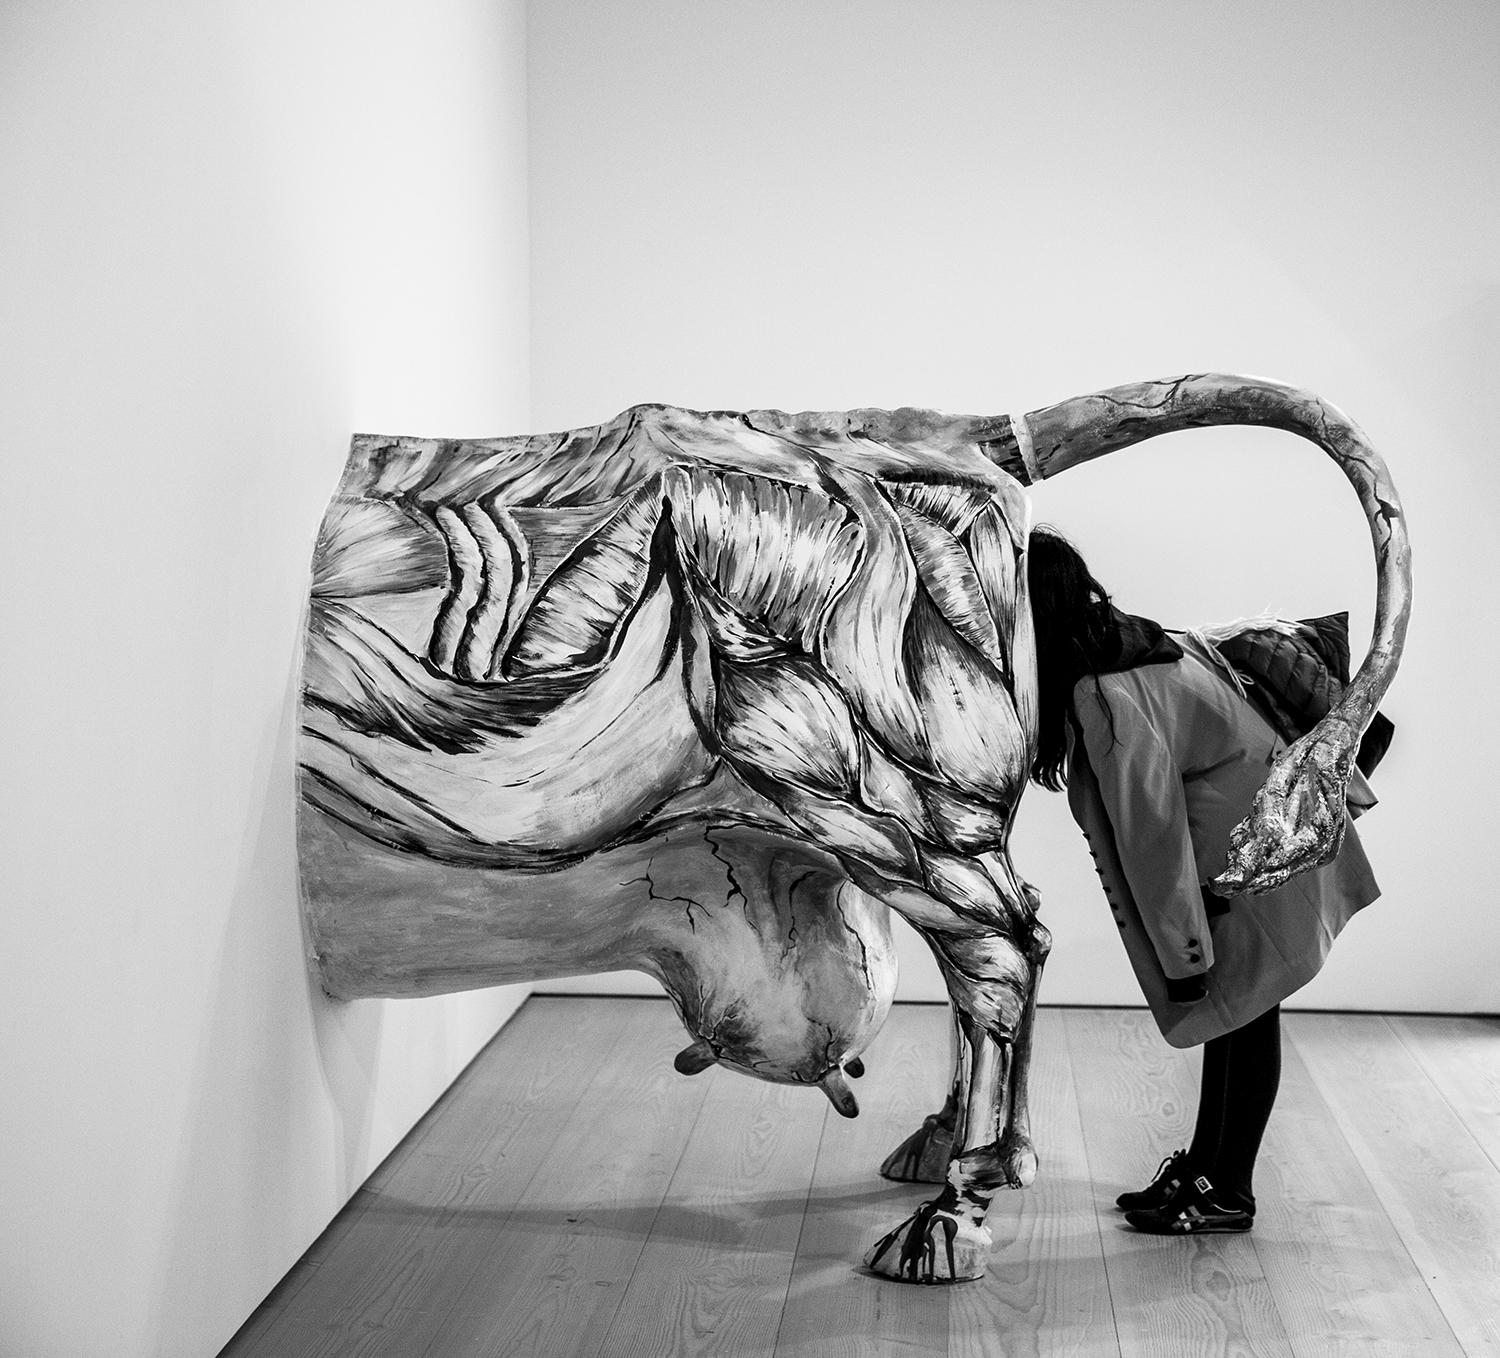 Edition of 25
signed and numbered by the artist

A women looks in to a plastic of a cow. This photo was taken in a Museum in Berlin.

JJK is a pseudonym for one of the world's most successful photo artists.
In his series "Always in my mind", he